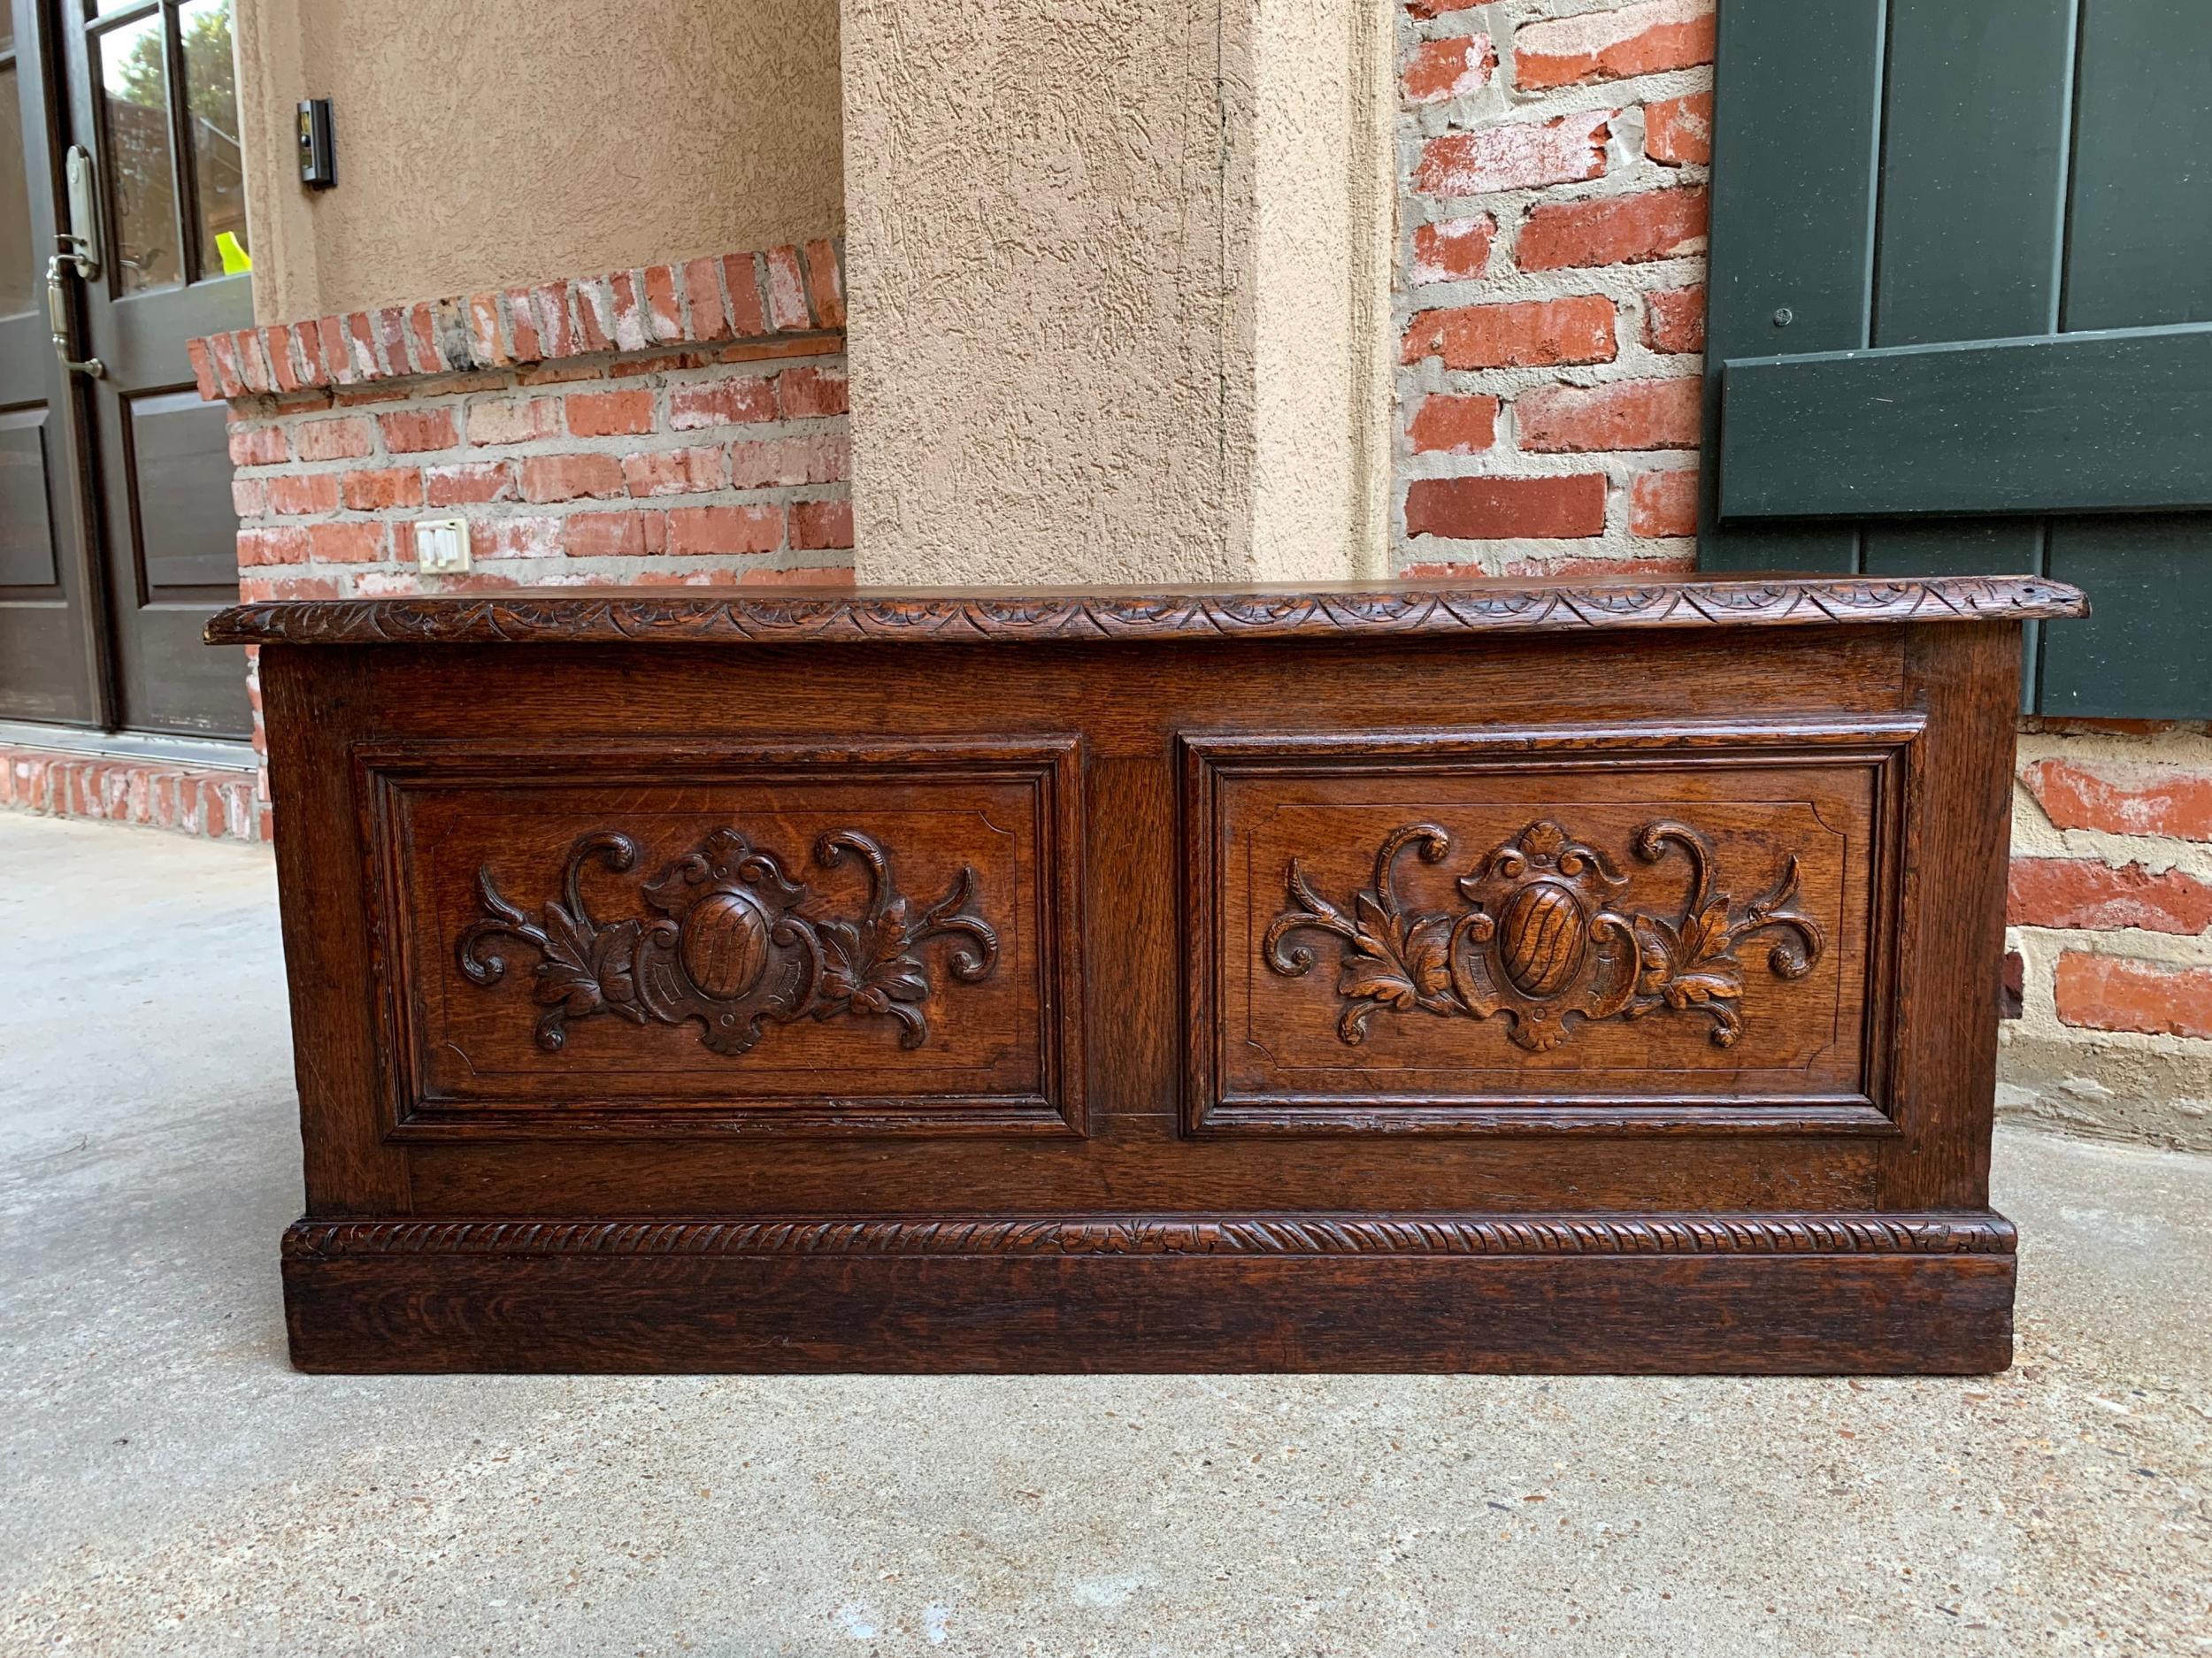 Antique English carved oak trunk chest coffee table blanket box

~Direct from England~
~Great size antique English carved oak blanket box or coffee table!~
~Two inset panels with carved foliate designs around a center cartouche~
~Carved beveled